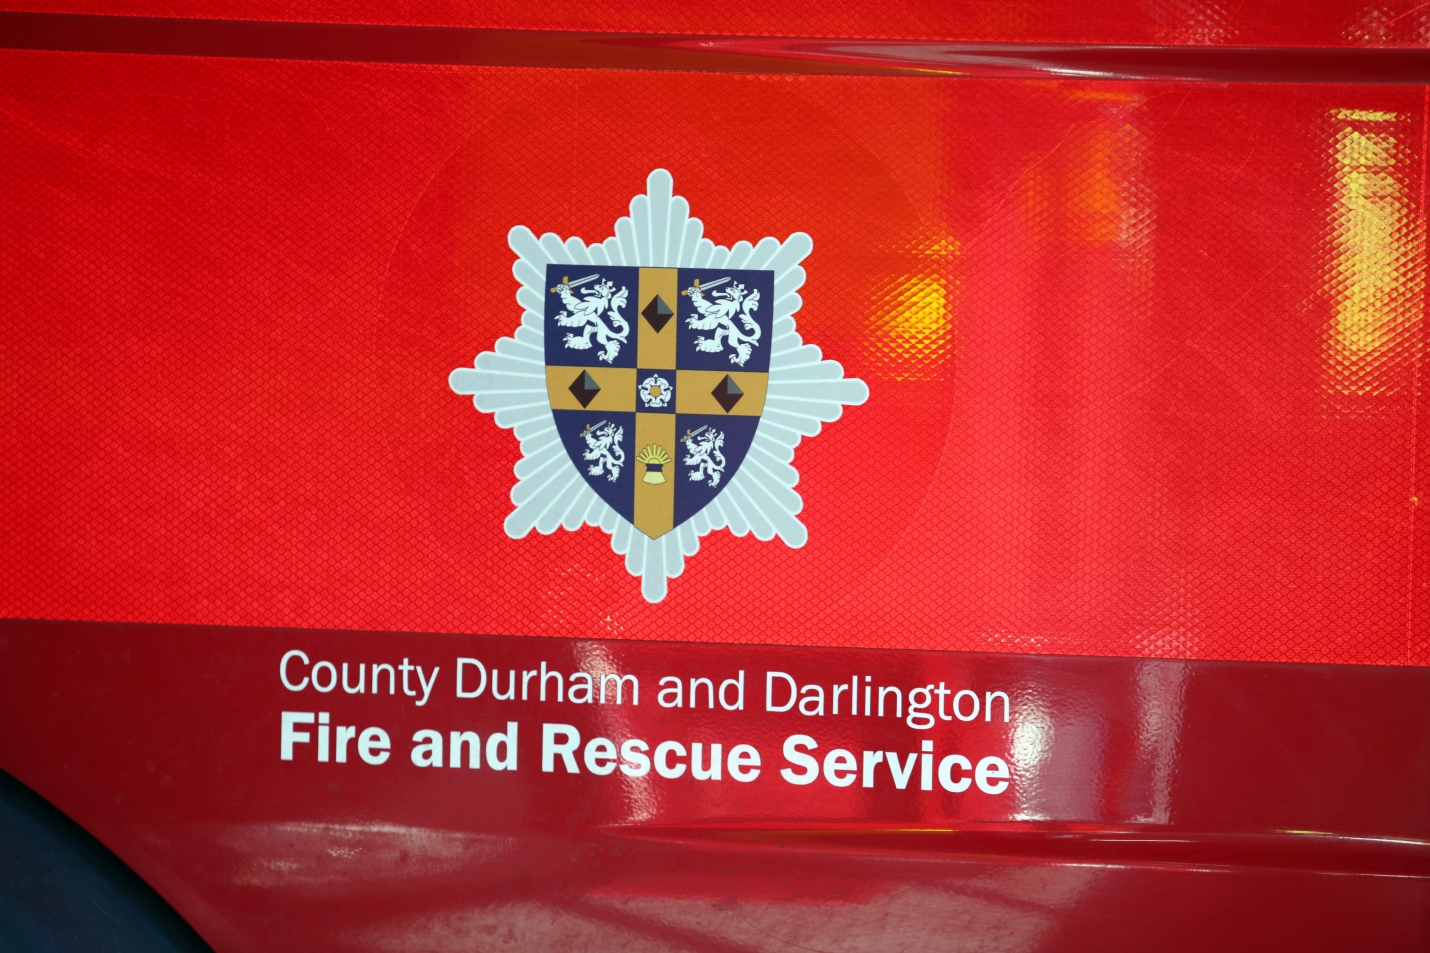 side of fire appliance with cddfrs logo showing